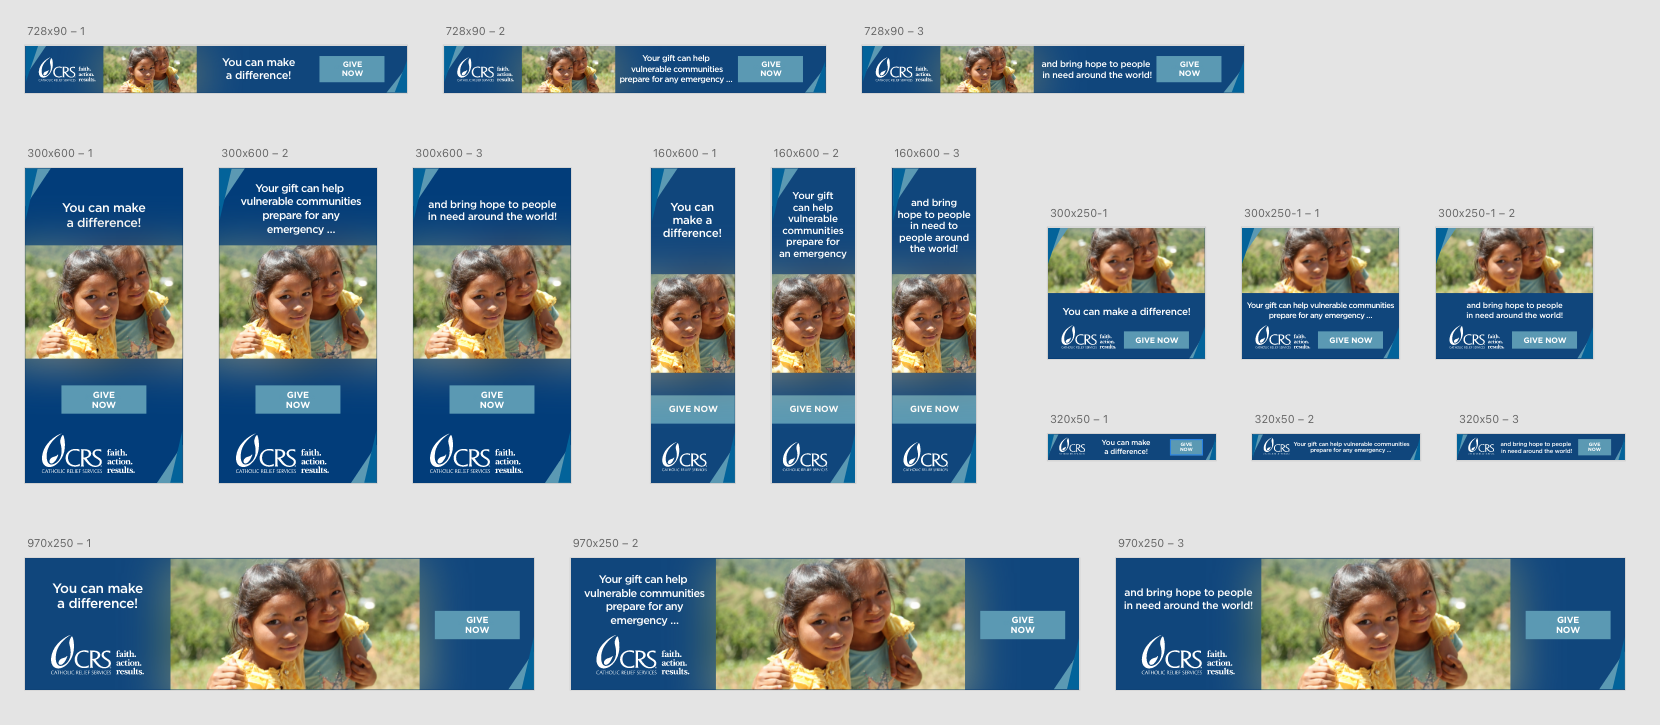 html5 banners for Catholic Relief Services